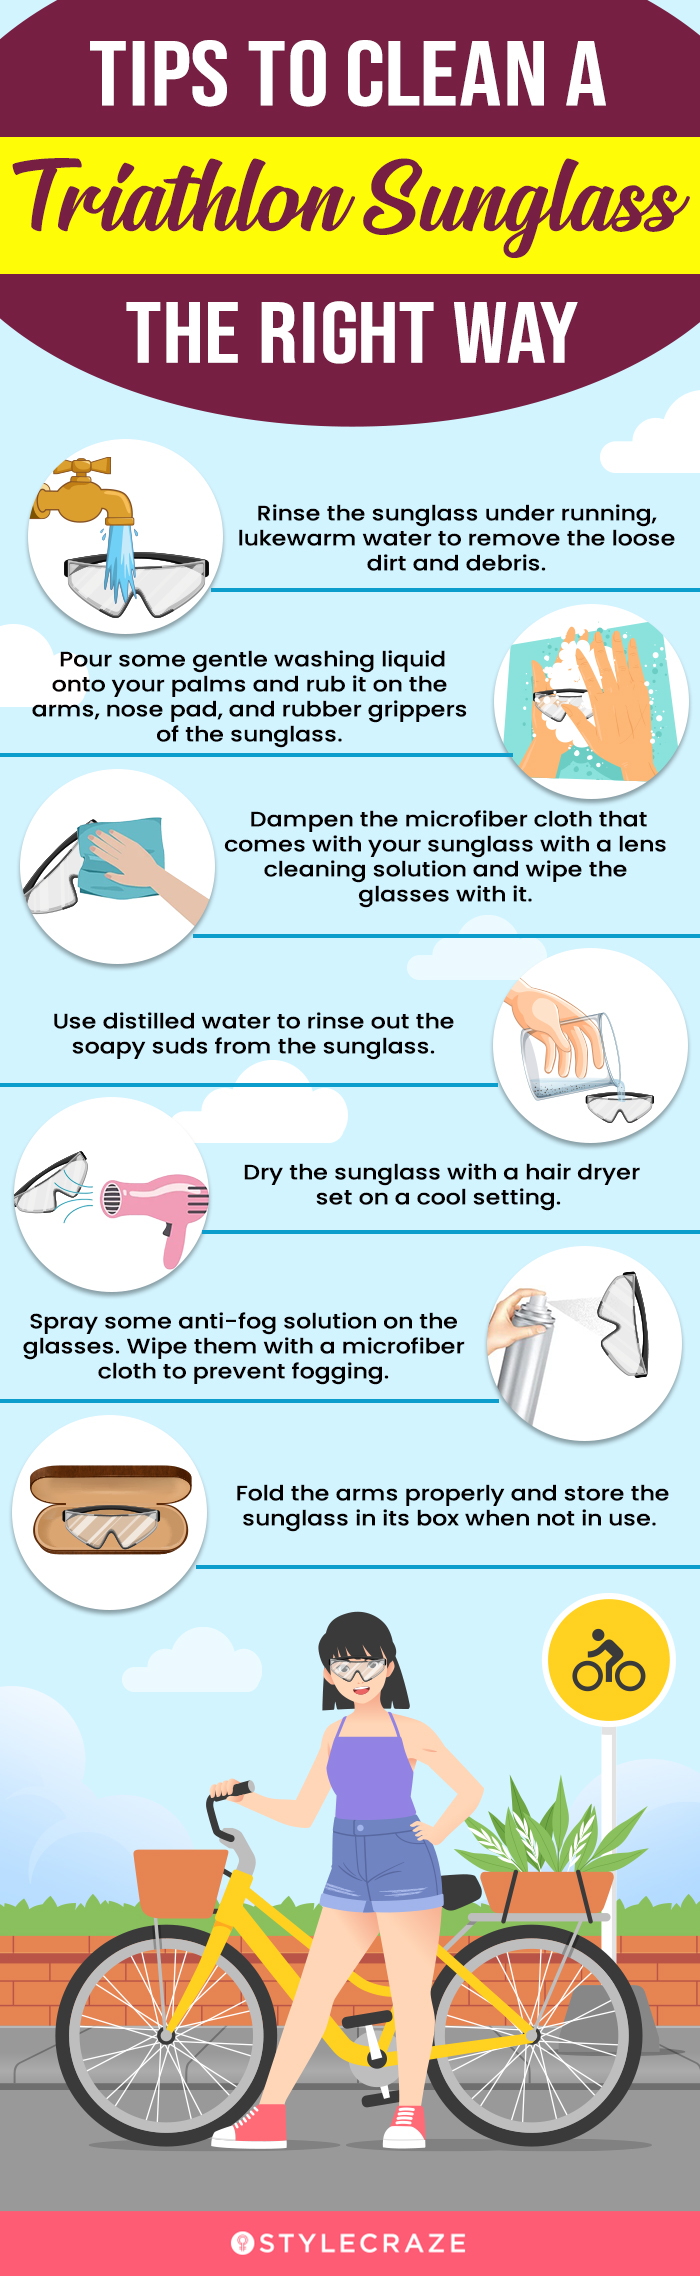 Tips To Clean A Triathlon Sunglass The Right Way (infographic)